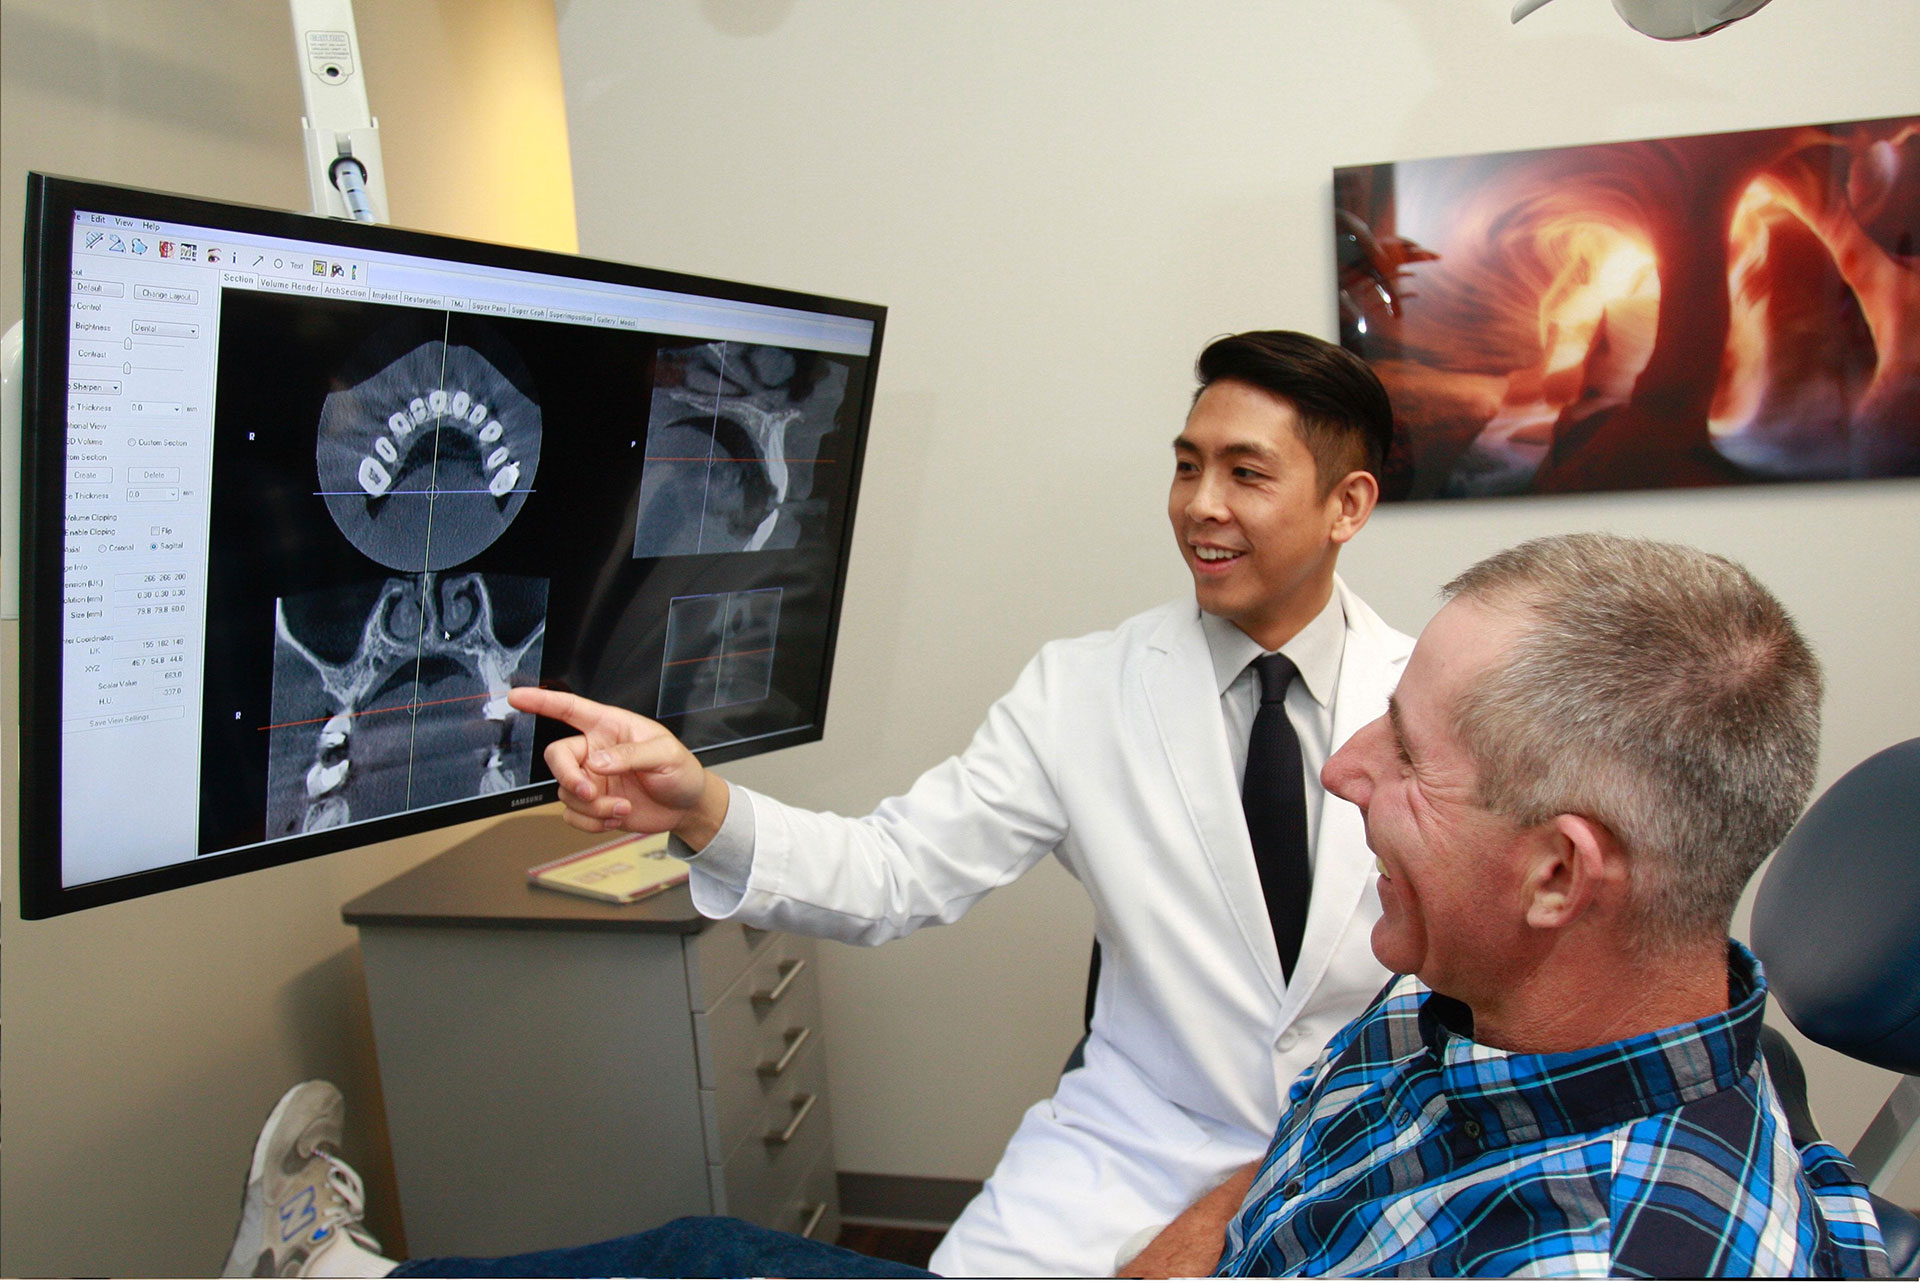 The image shows a medical professional, possibly a radiologist or dentist, using a large screen to explain an X-ray image to a patient in a dental or medical office setting.